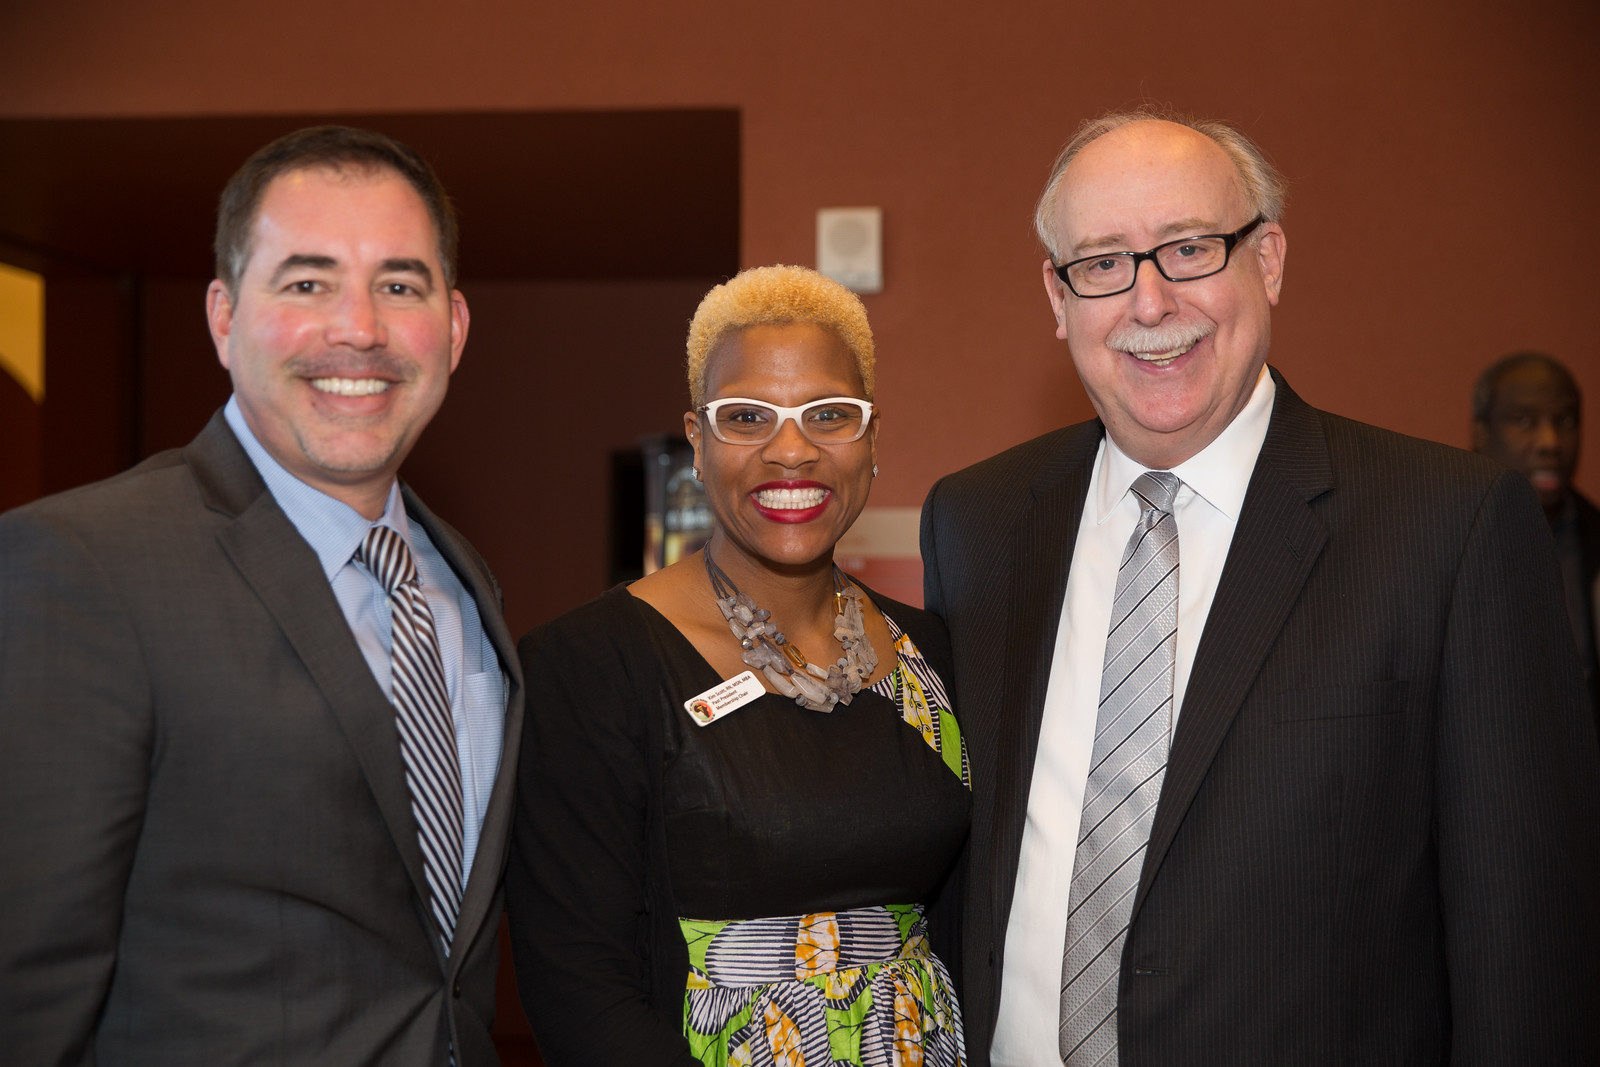 Director of Recruitment and Outreach Sergio Saenz, BABNA President Kim Scott, and Dean David Vlahov pose at the Multicultural Nursing Mixer in the UCSF Mission Bay Pub. Photo credit: Elisabeth Fall.